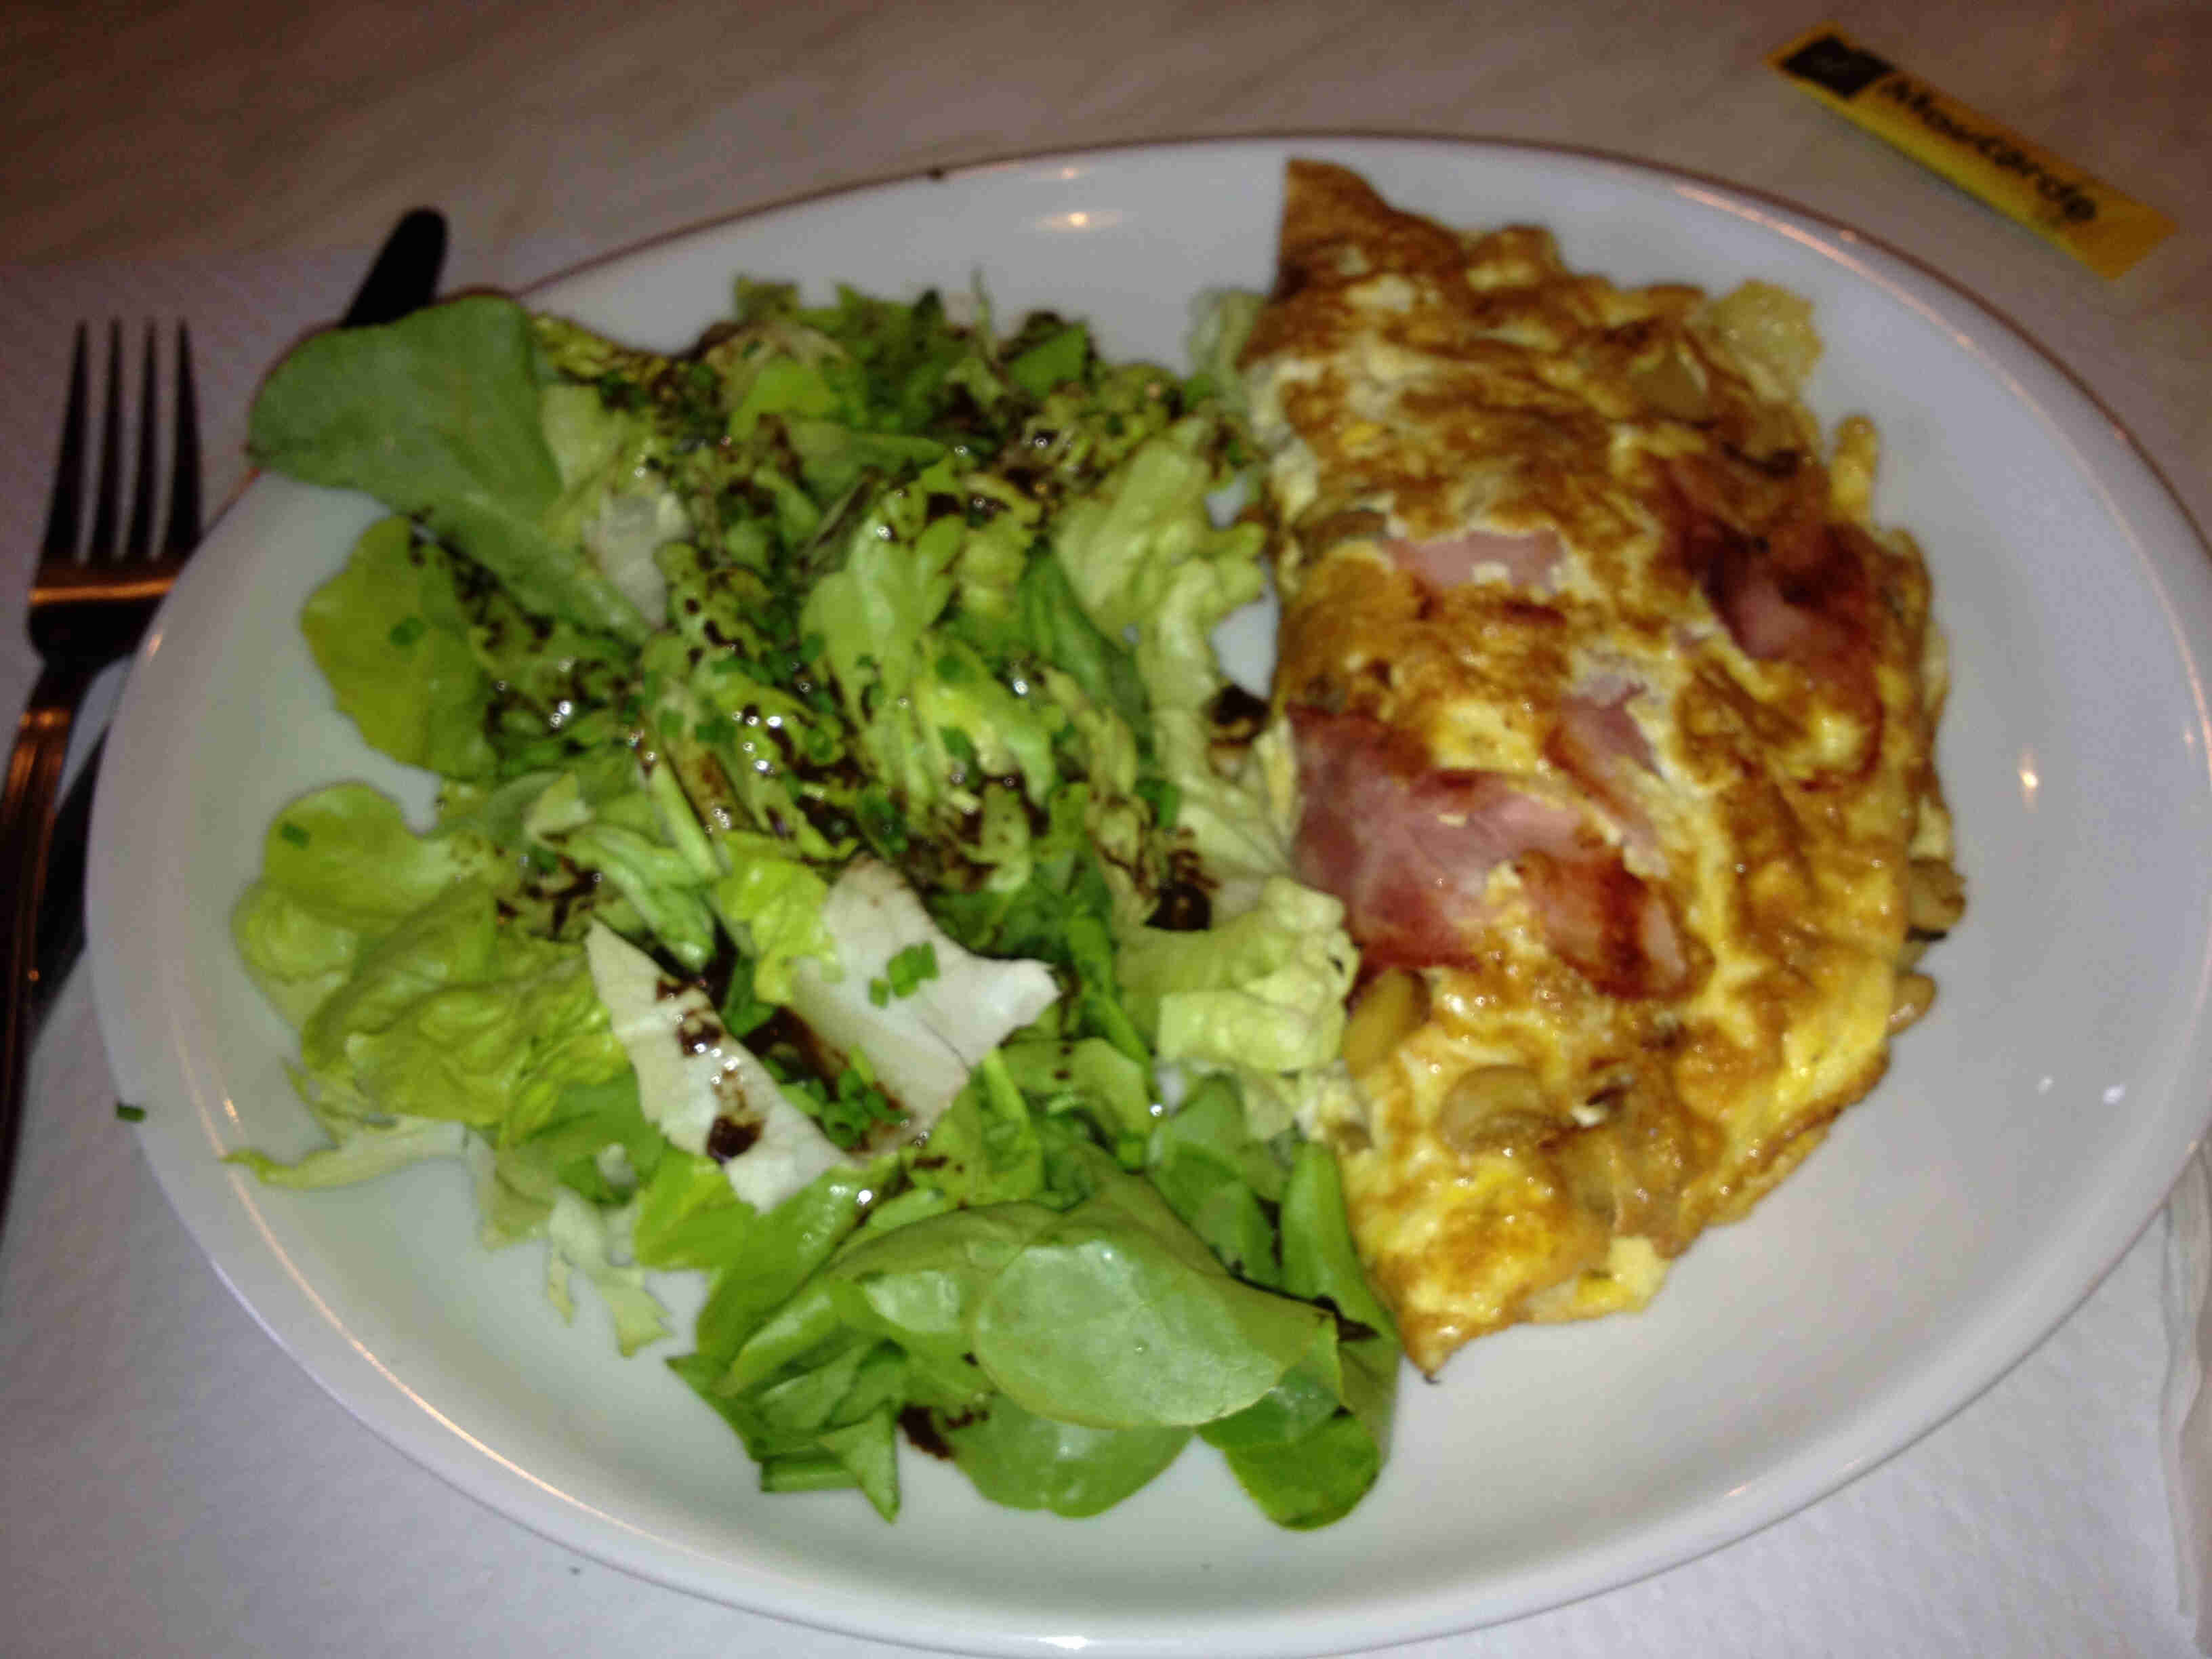 An omelet and green leafy vegetables on a white plate